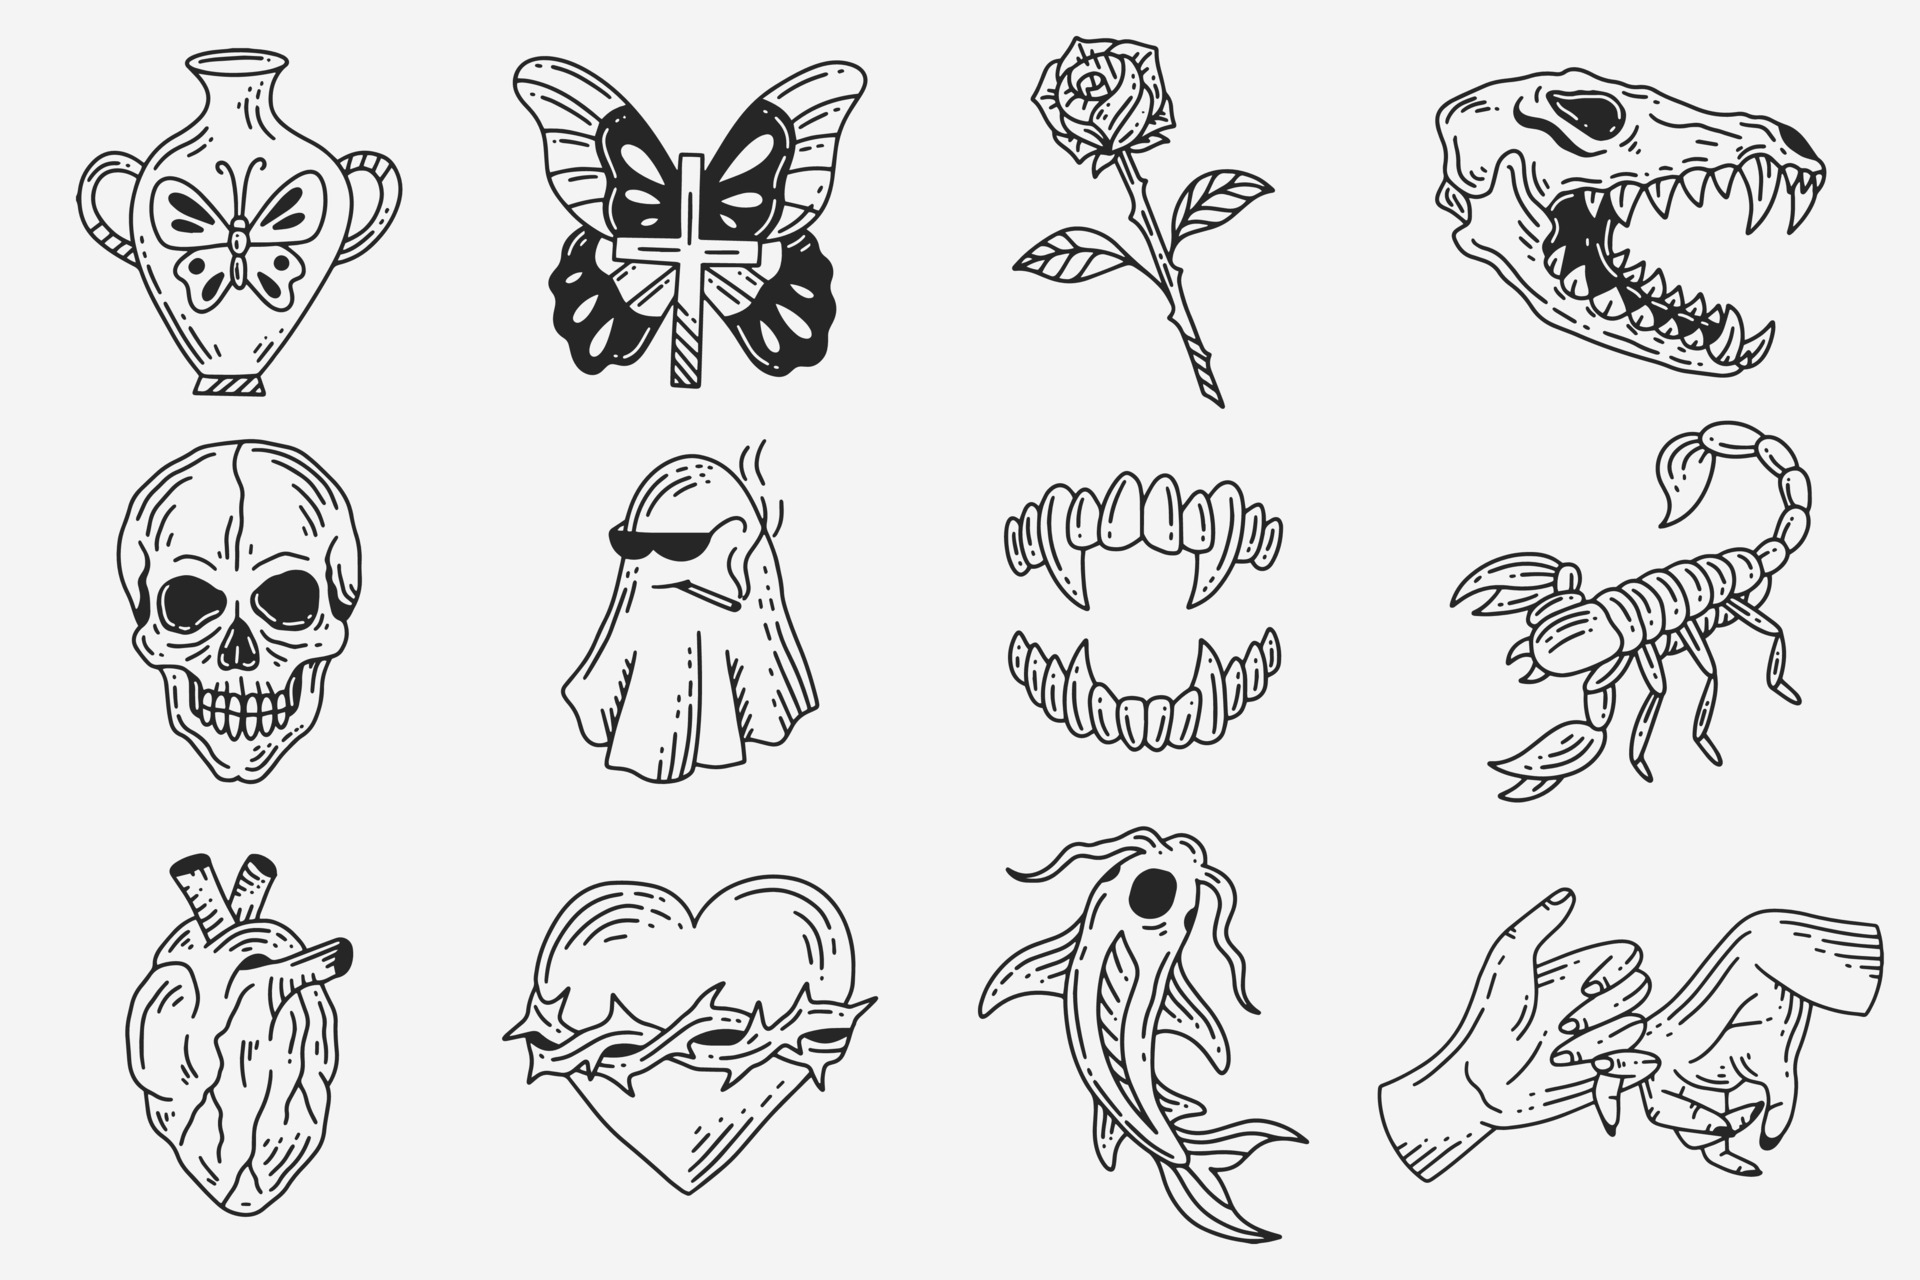 Tribal Tattoo Designs Images  Free Photos PNG Stickers Wallpapers   Backgrounds  rawpixel